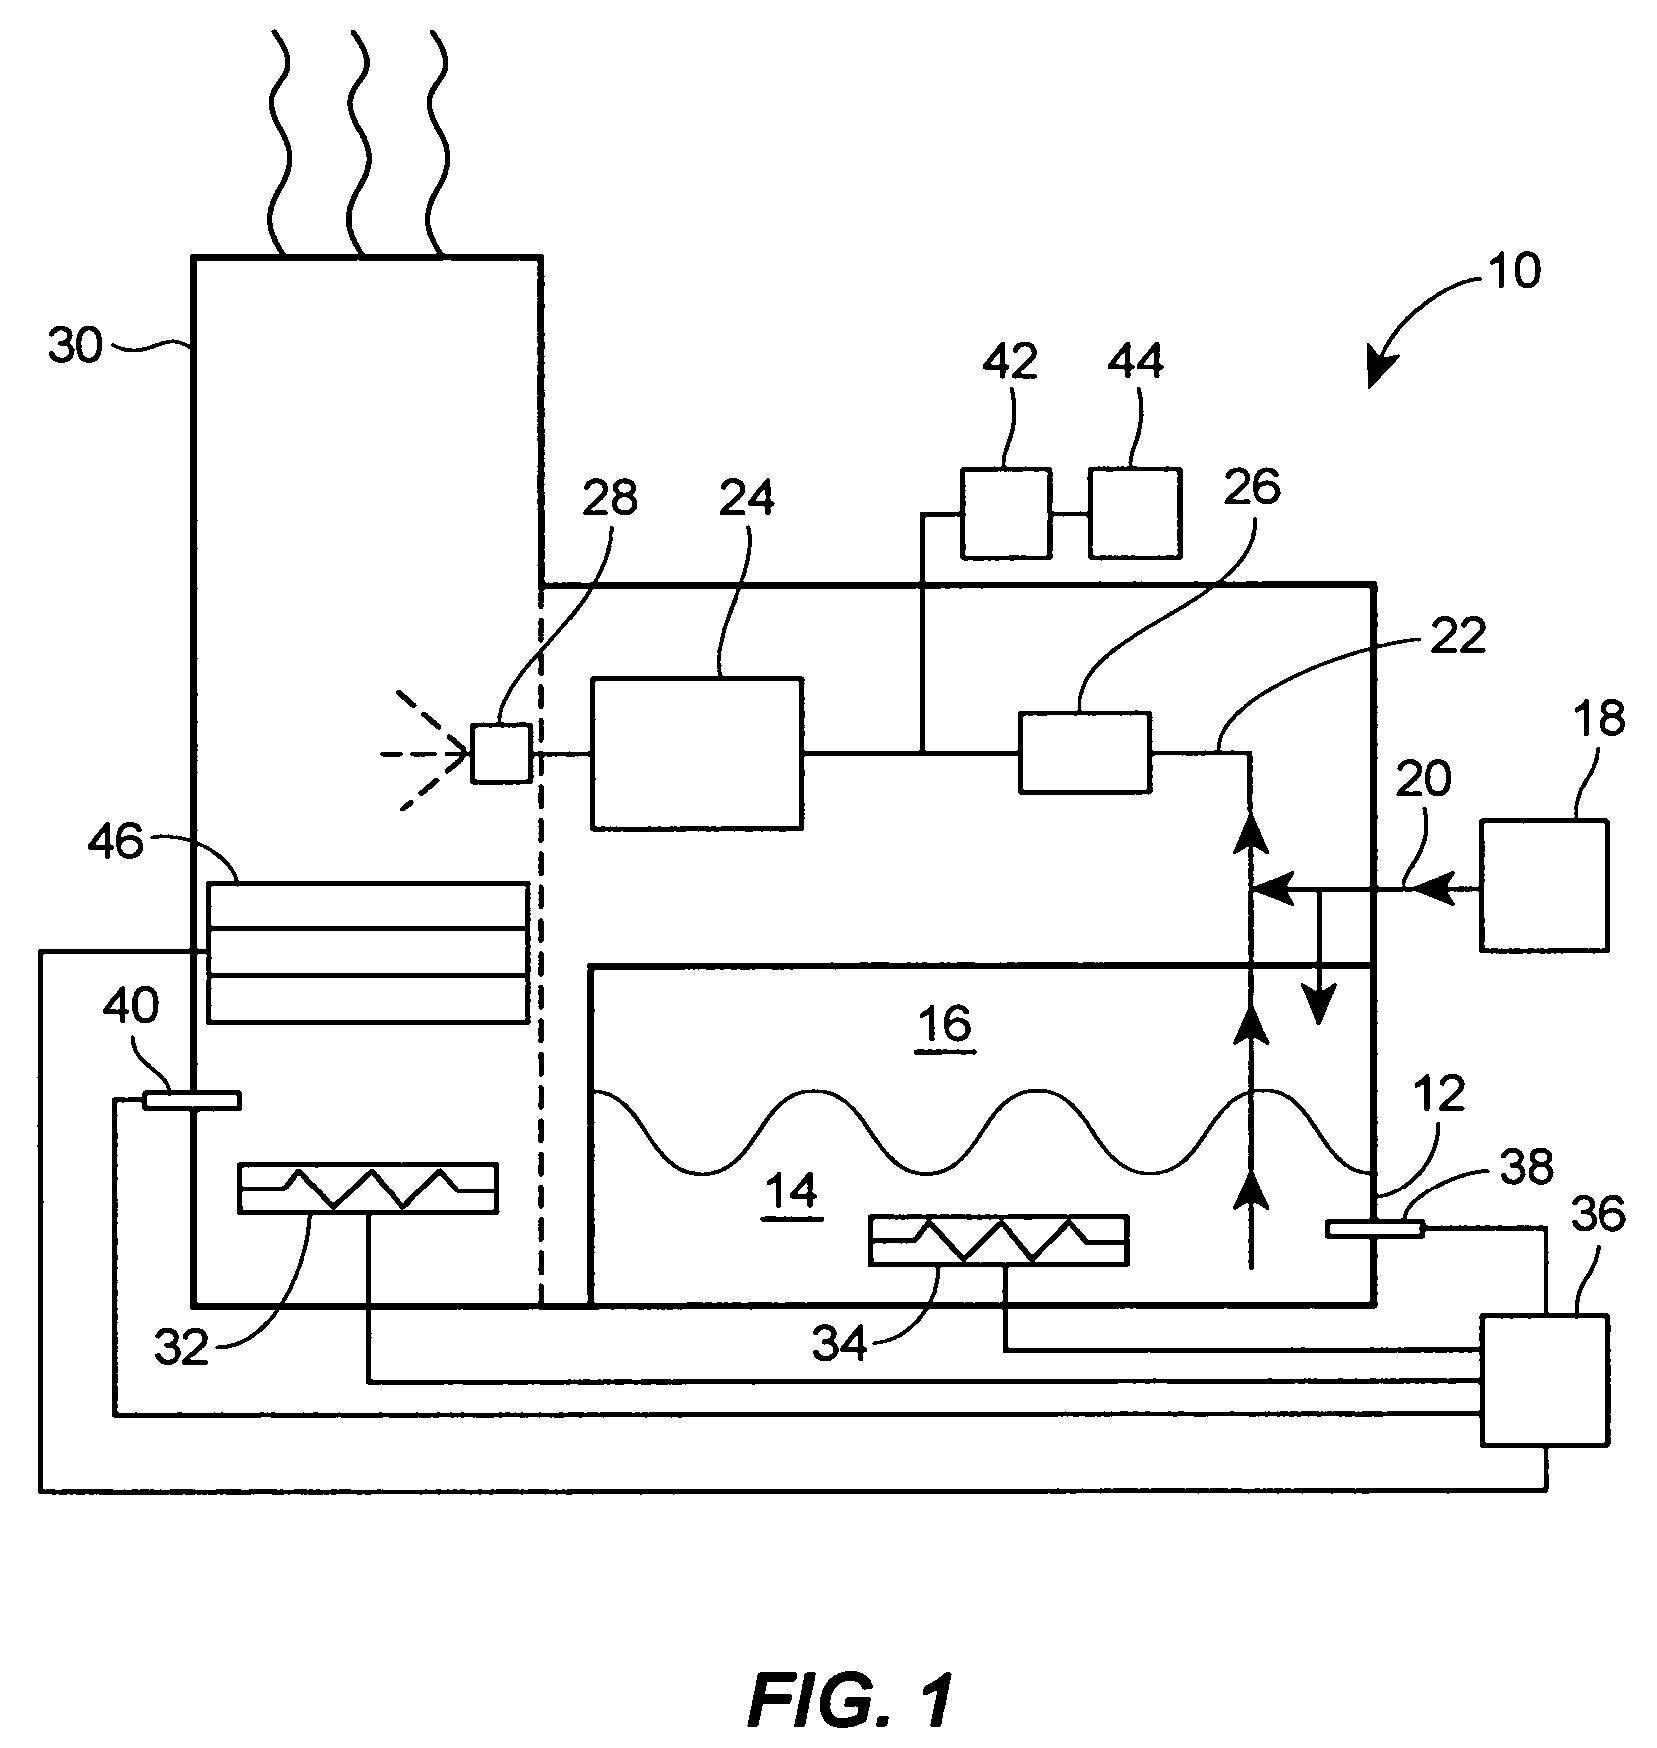 Method and apparatus for generating consistent simulated smoke